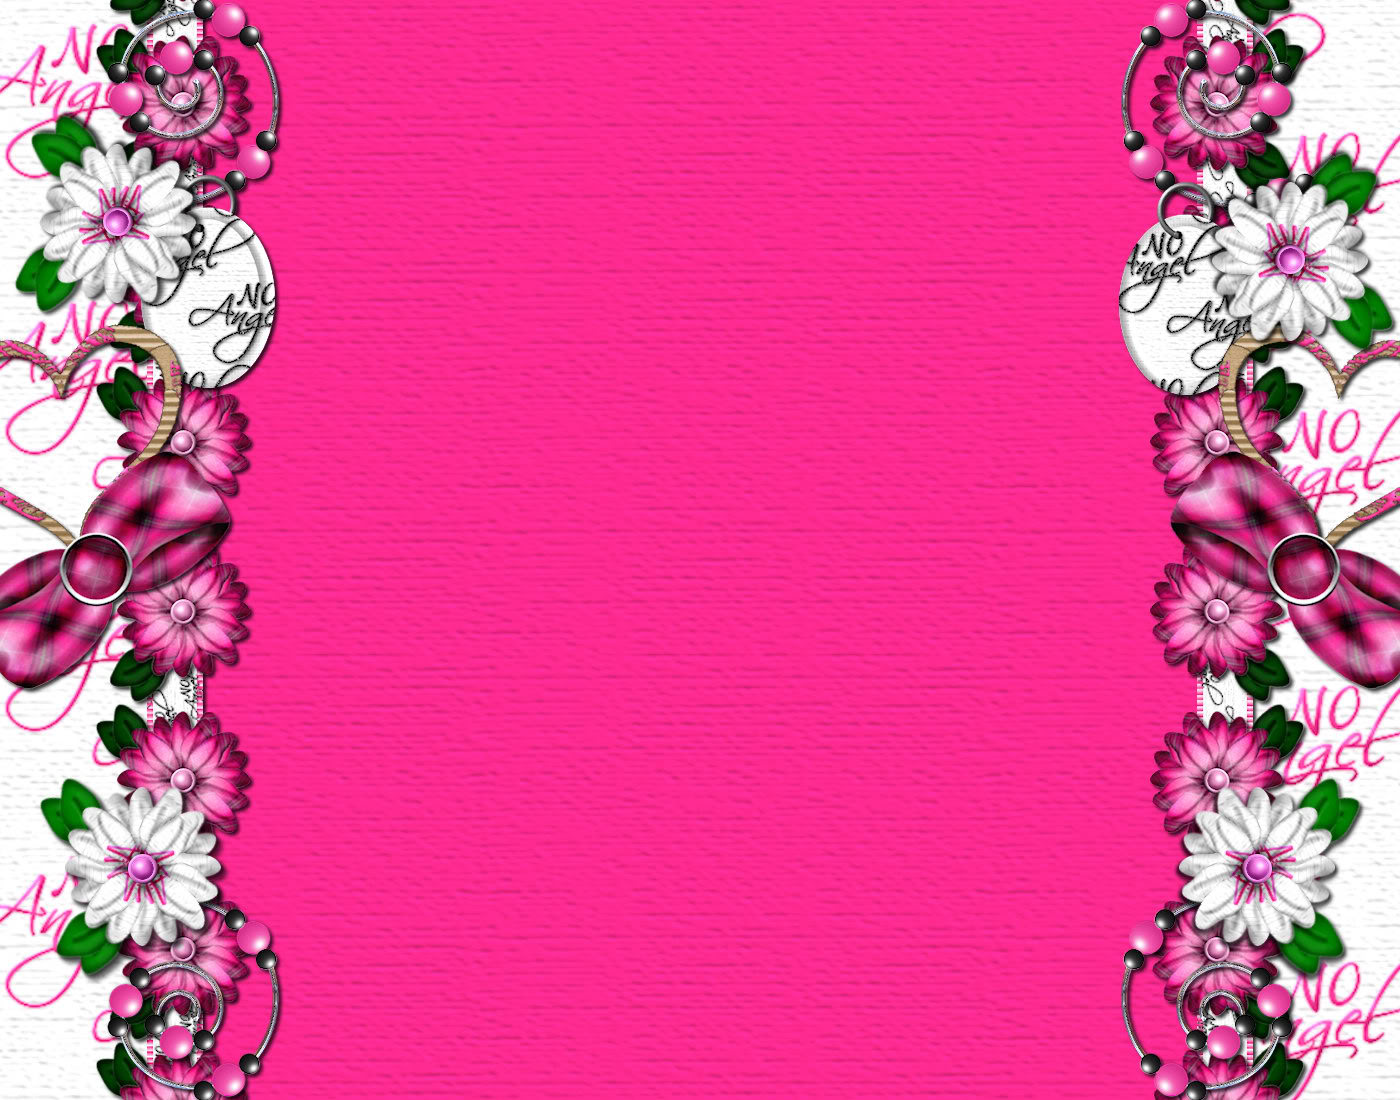 Bad Girl Friend Frame free powerpoint background